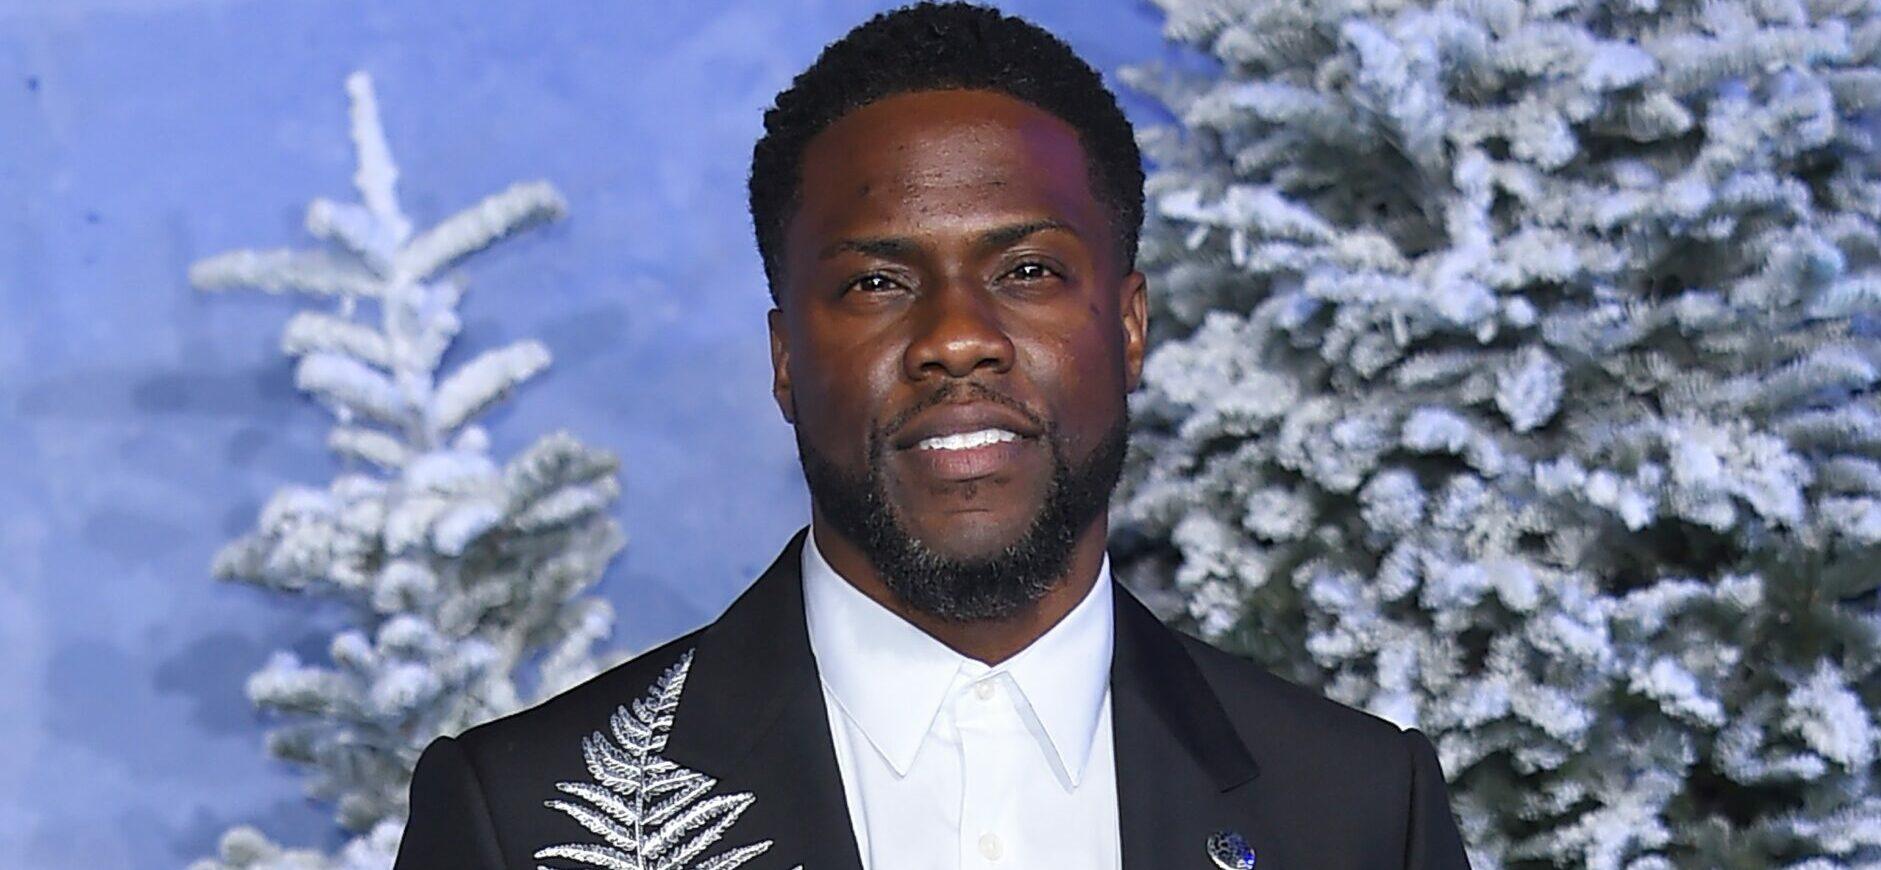 Kevin Hart Drops Over $200,000 On Purchase Of A 'Bored Ape' NFT